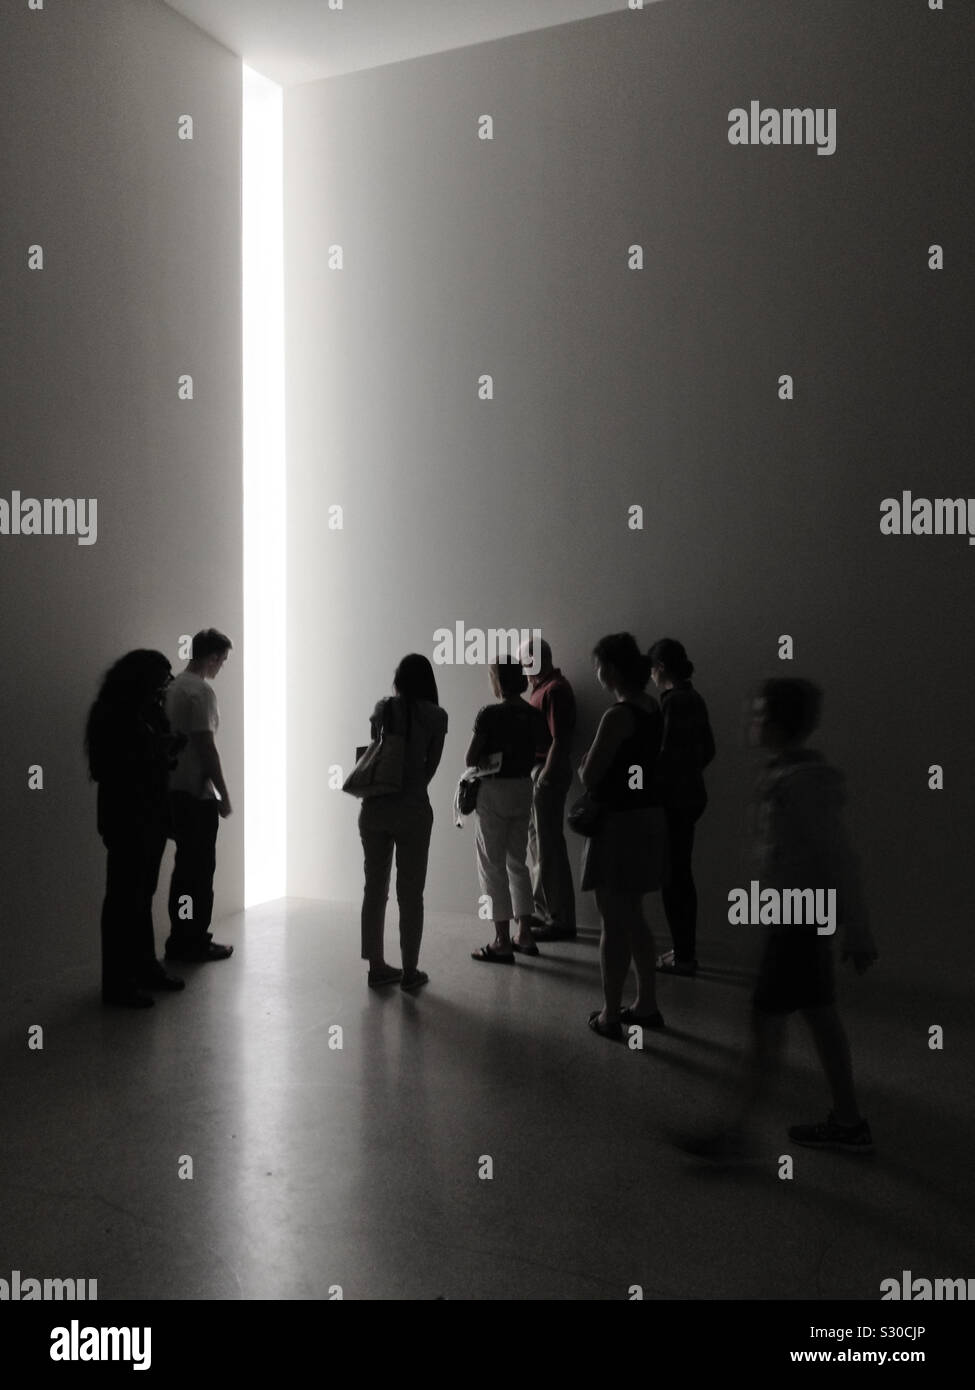 People standing around looking into a gap of light. Art exhibit. Concept. Stock Photo